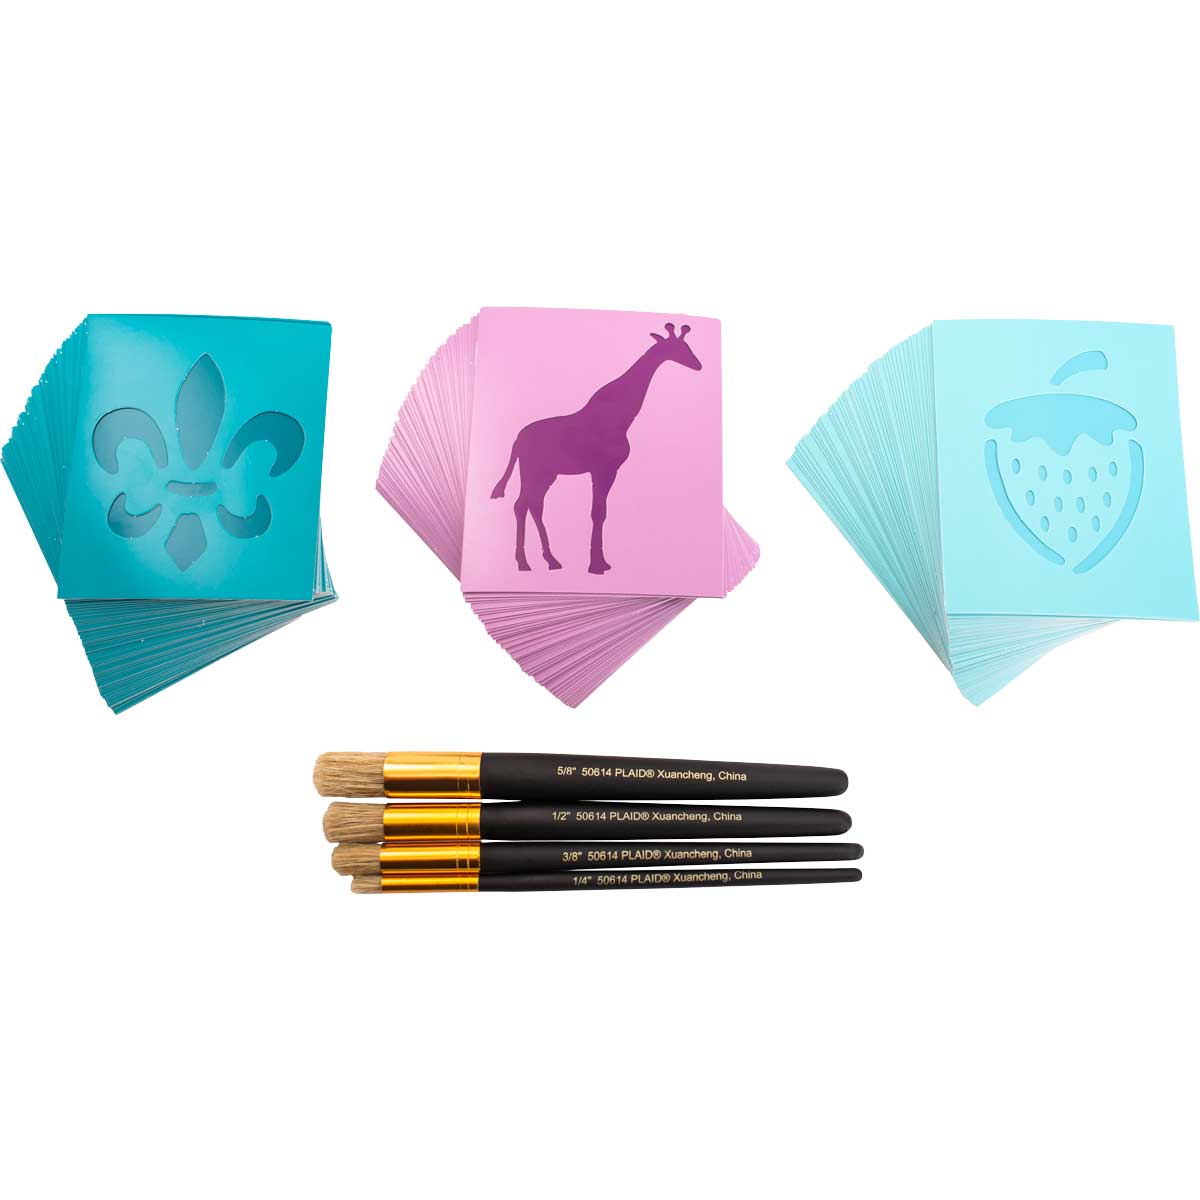 FolkArt ® Complete Paper Icon Stencil and Brush Set - PROMOFAPDSB